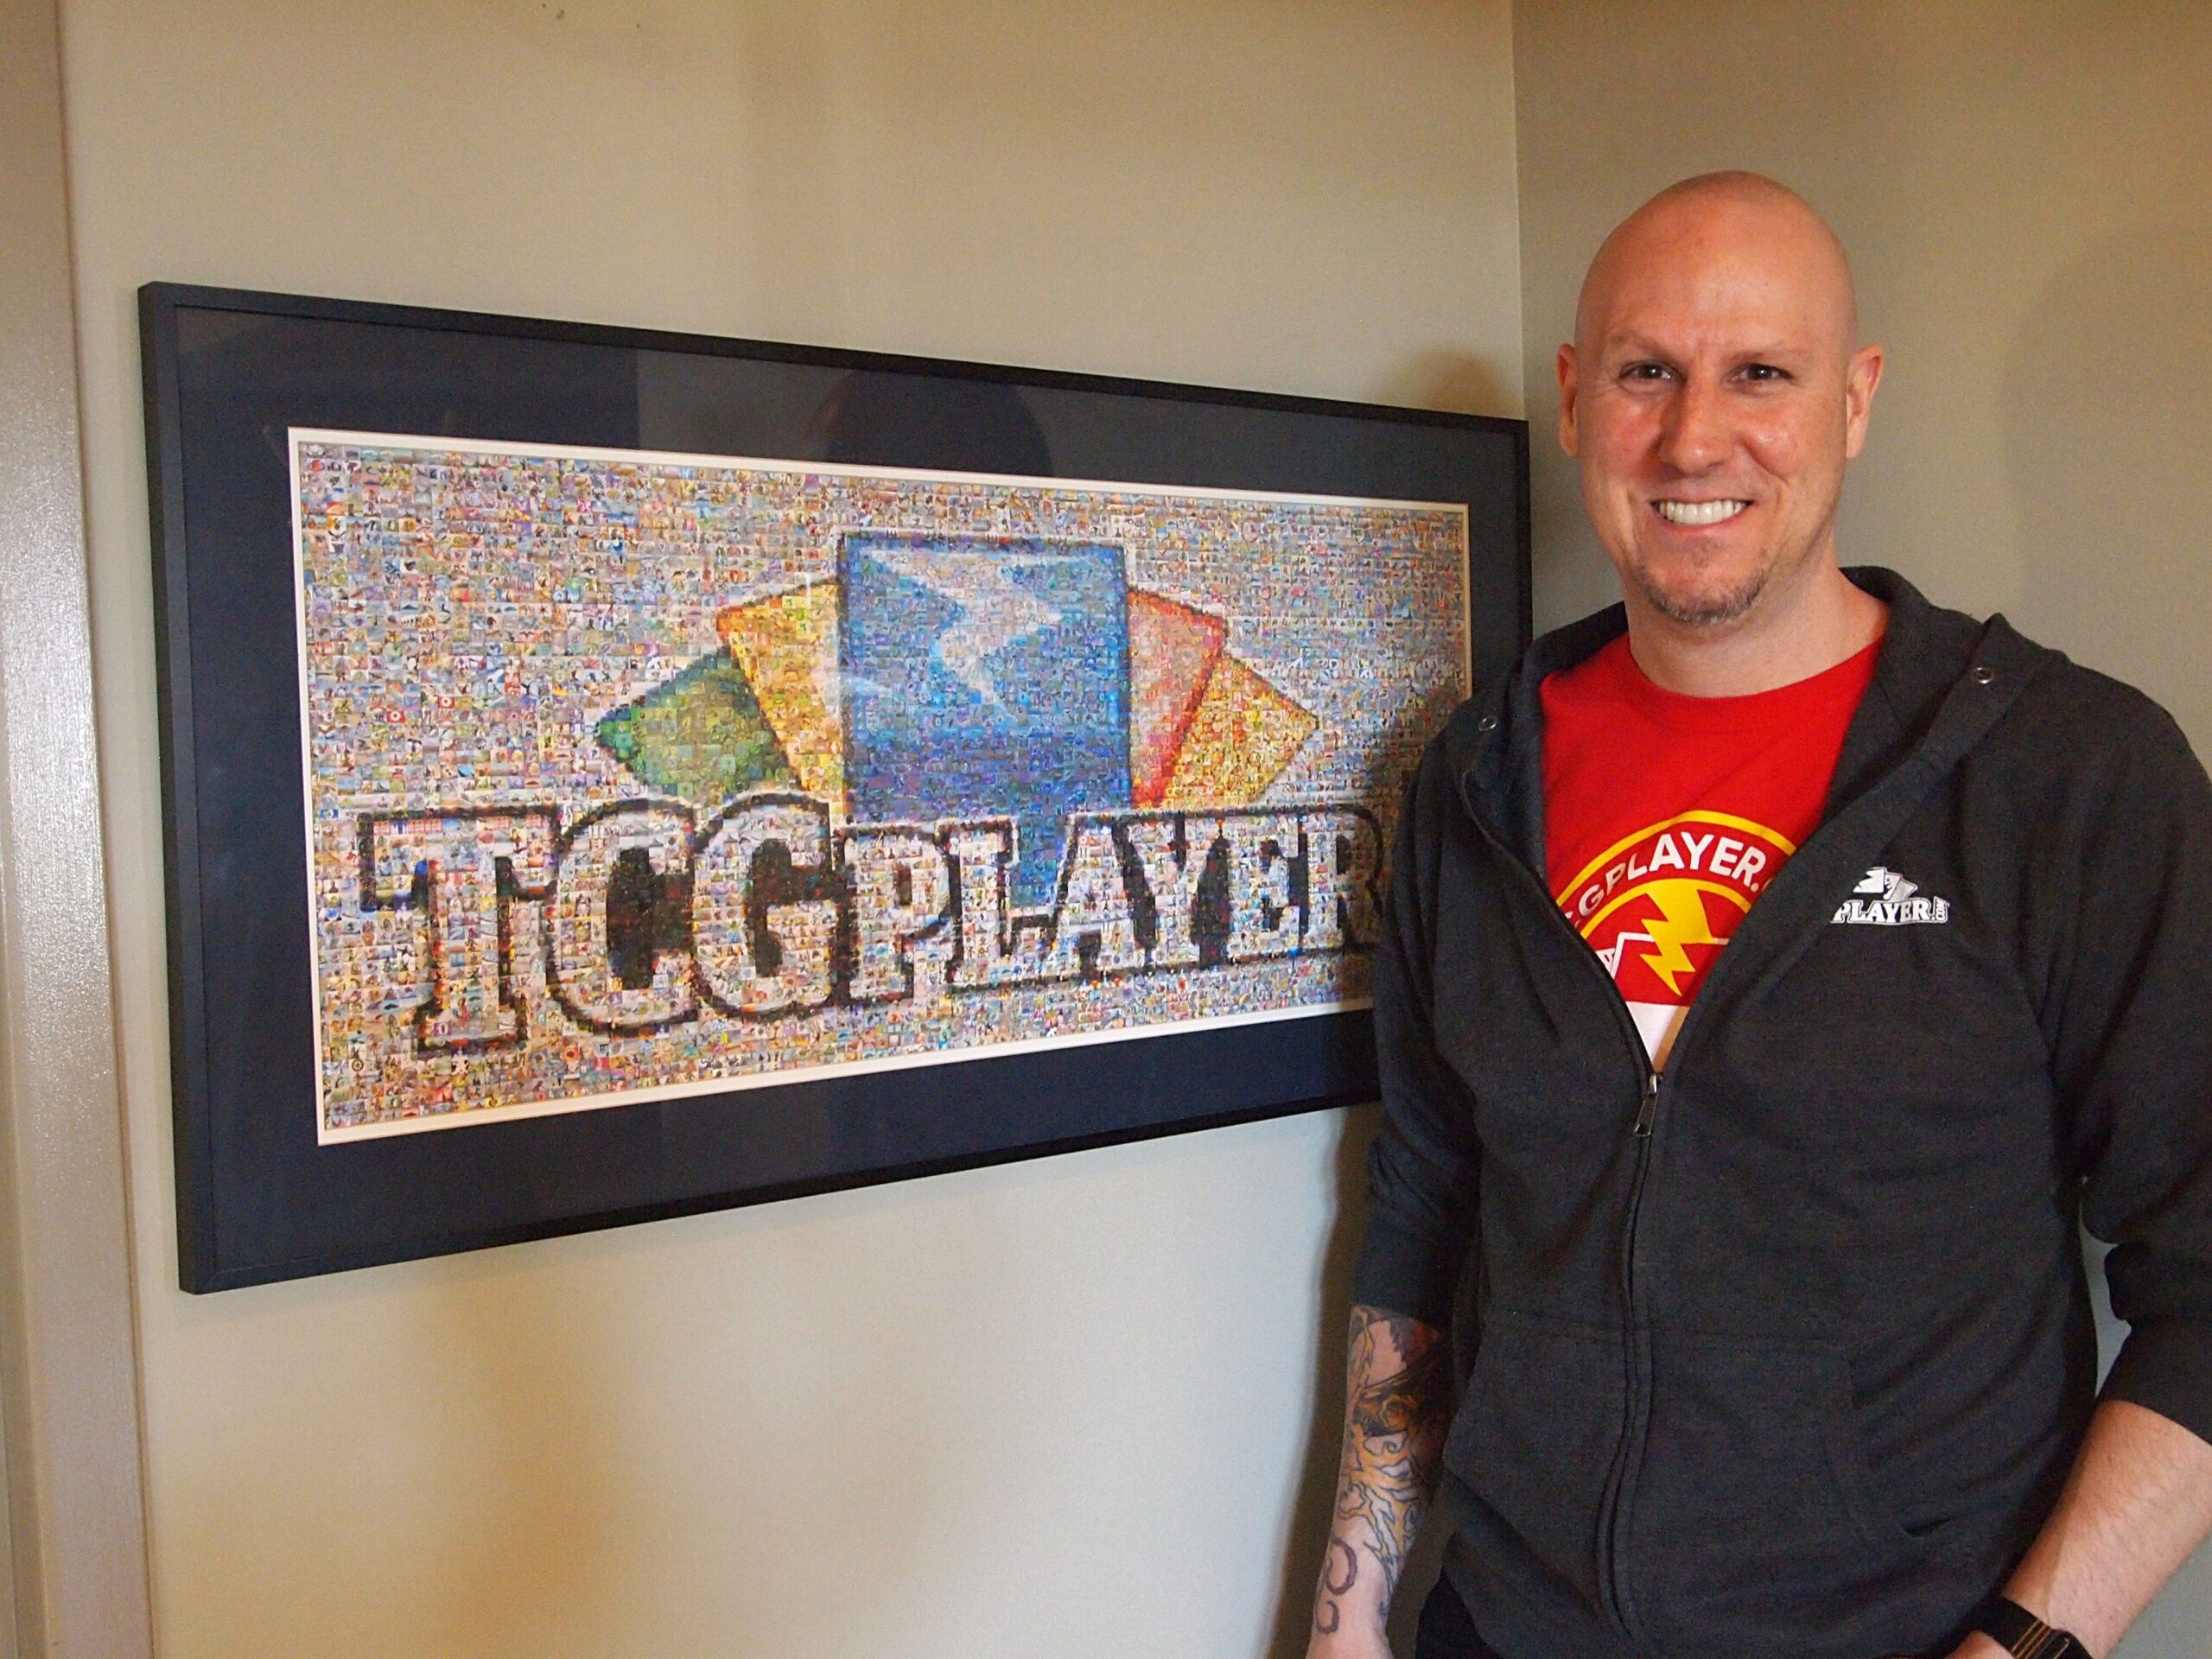 Have a look inside TCGplayer's fun new HQ in Syracuse 